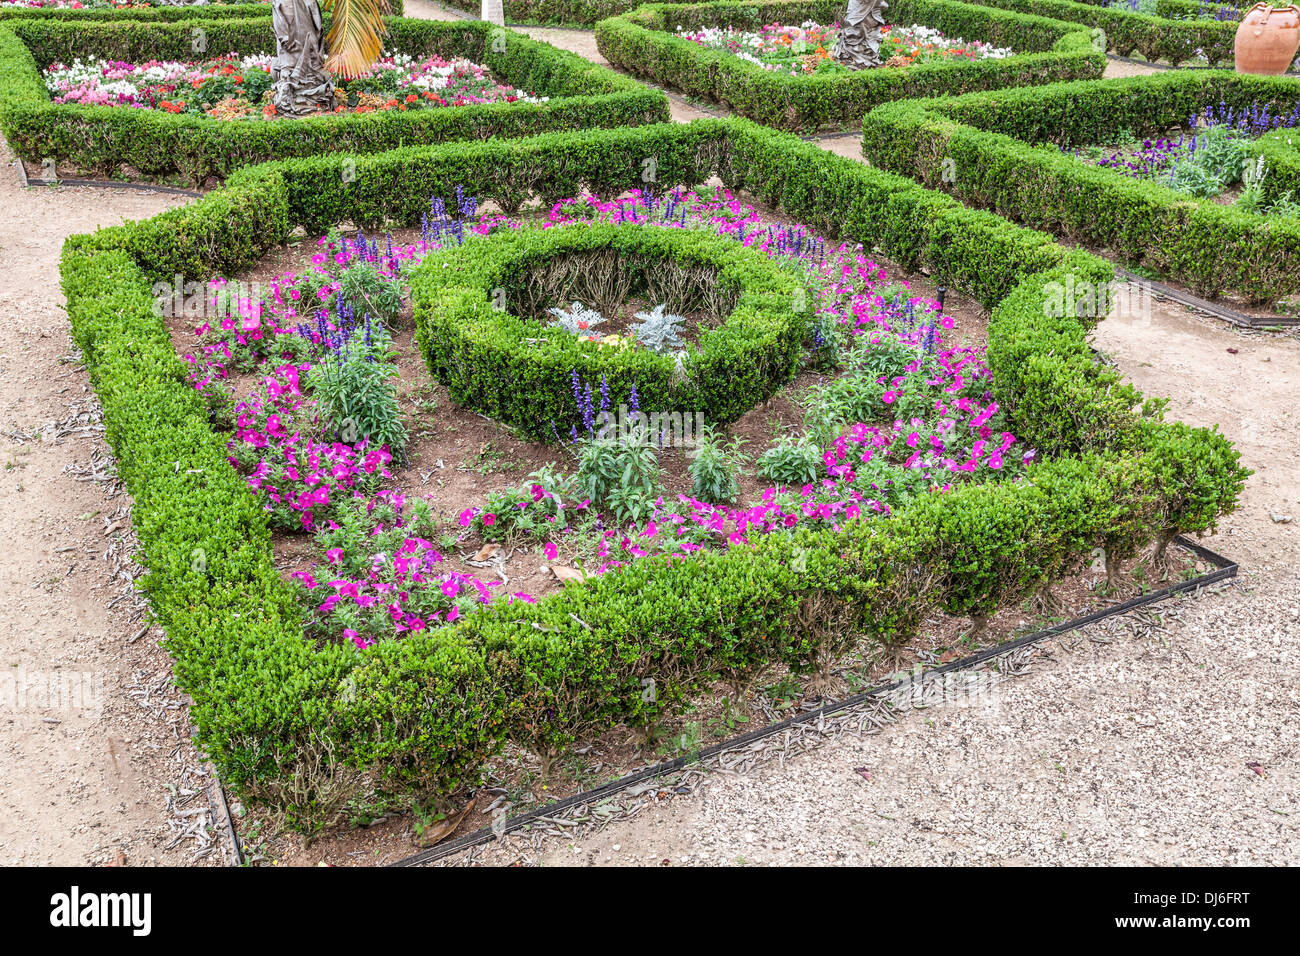 Clipped Boxwood Hedges Are Part Of The Formal Gardens In The